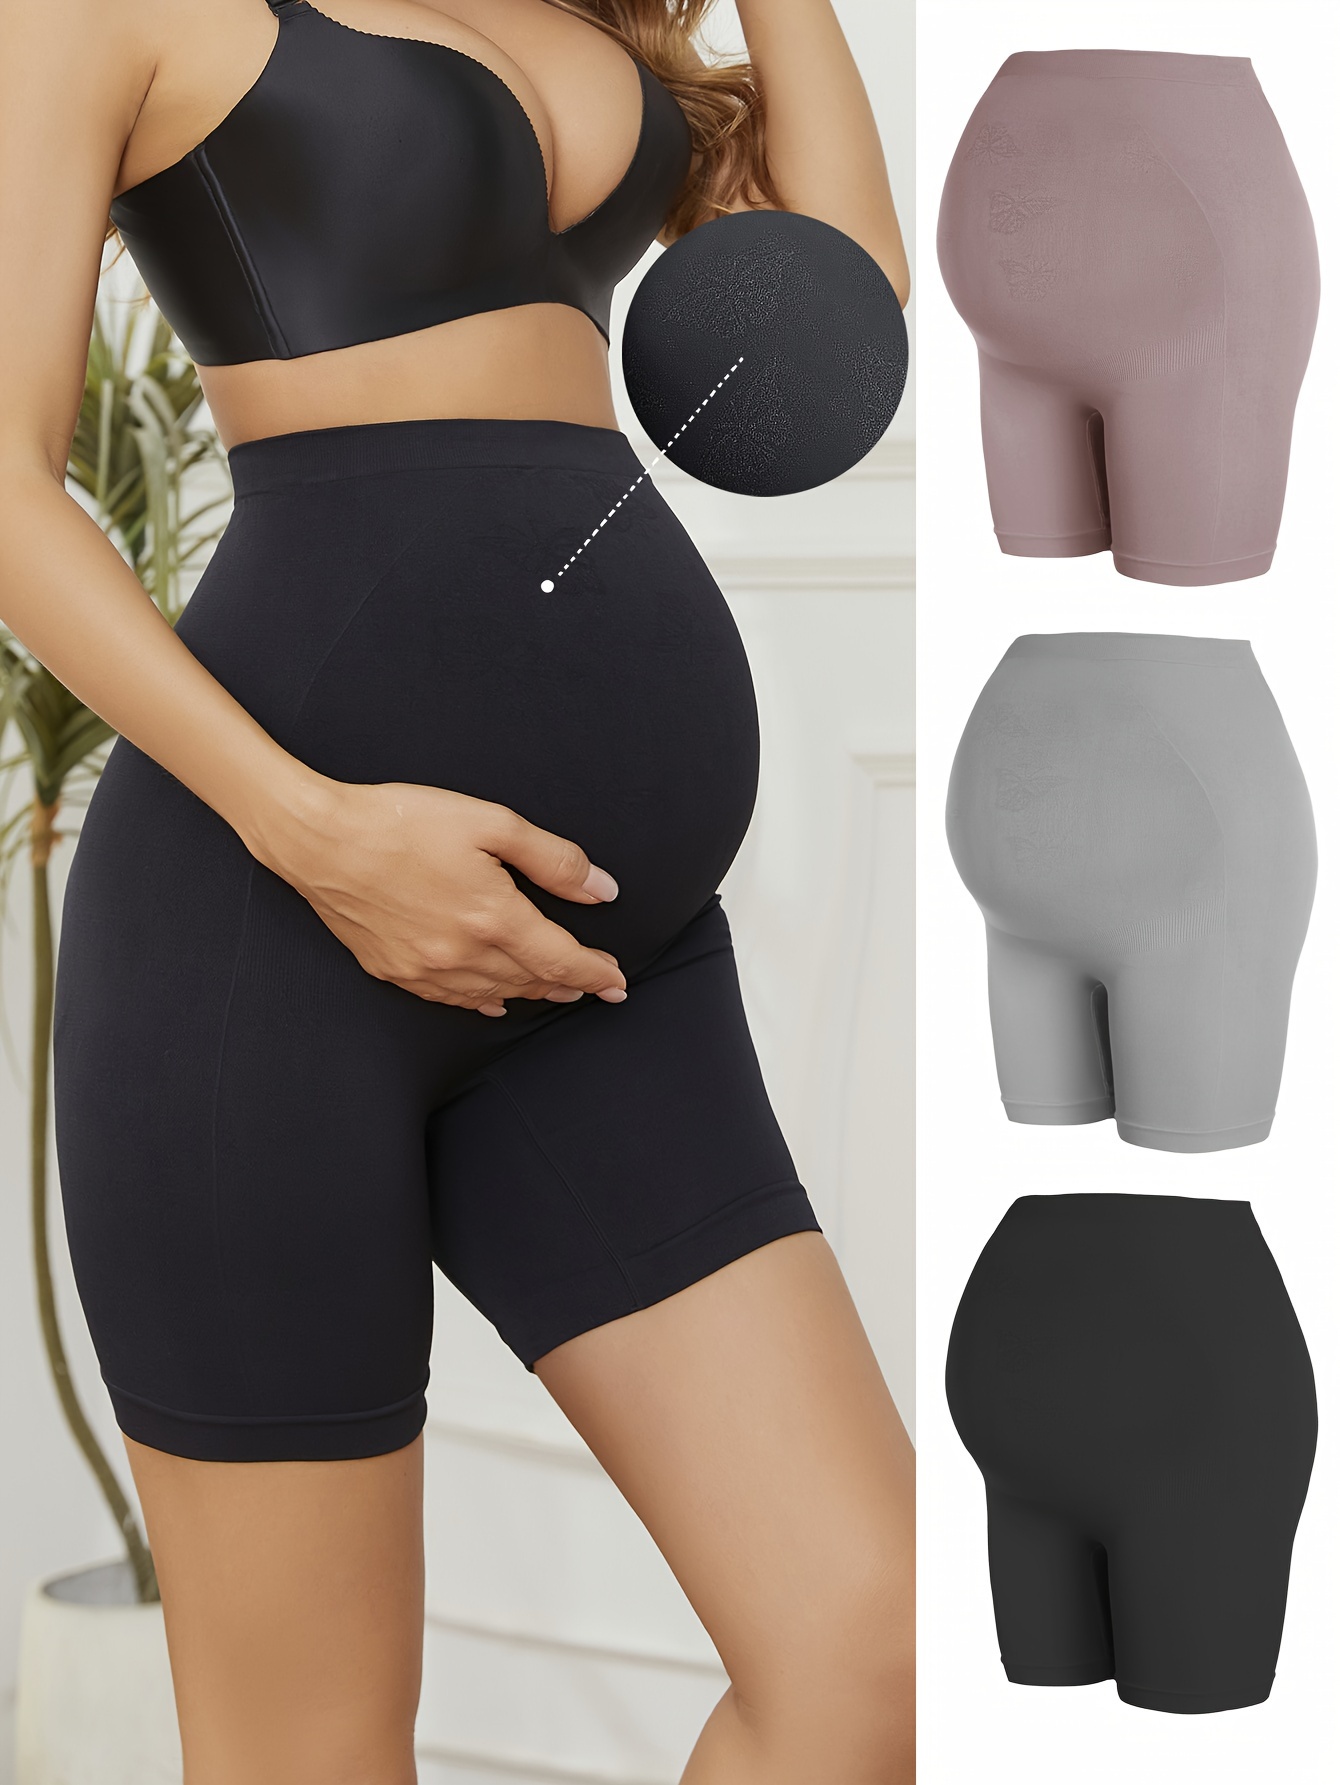 Women's Maternity Solid Leggings See Through Yoga Sports Pants, Pregnant  Women's Clothing